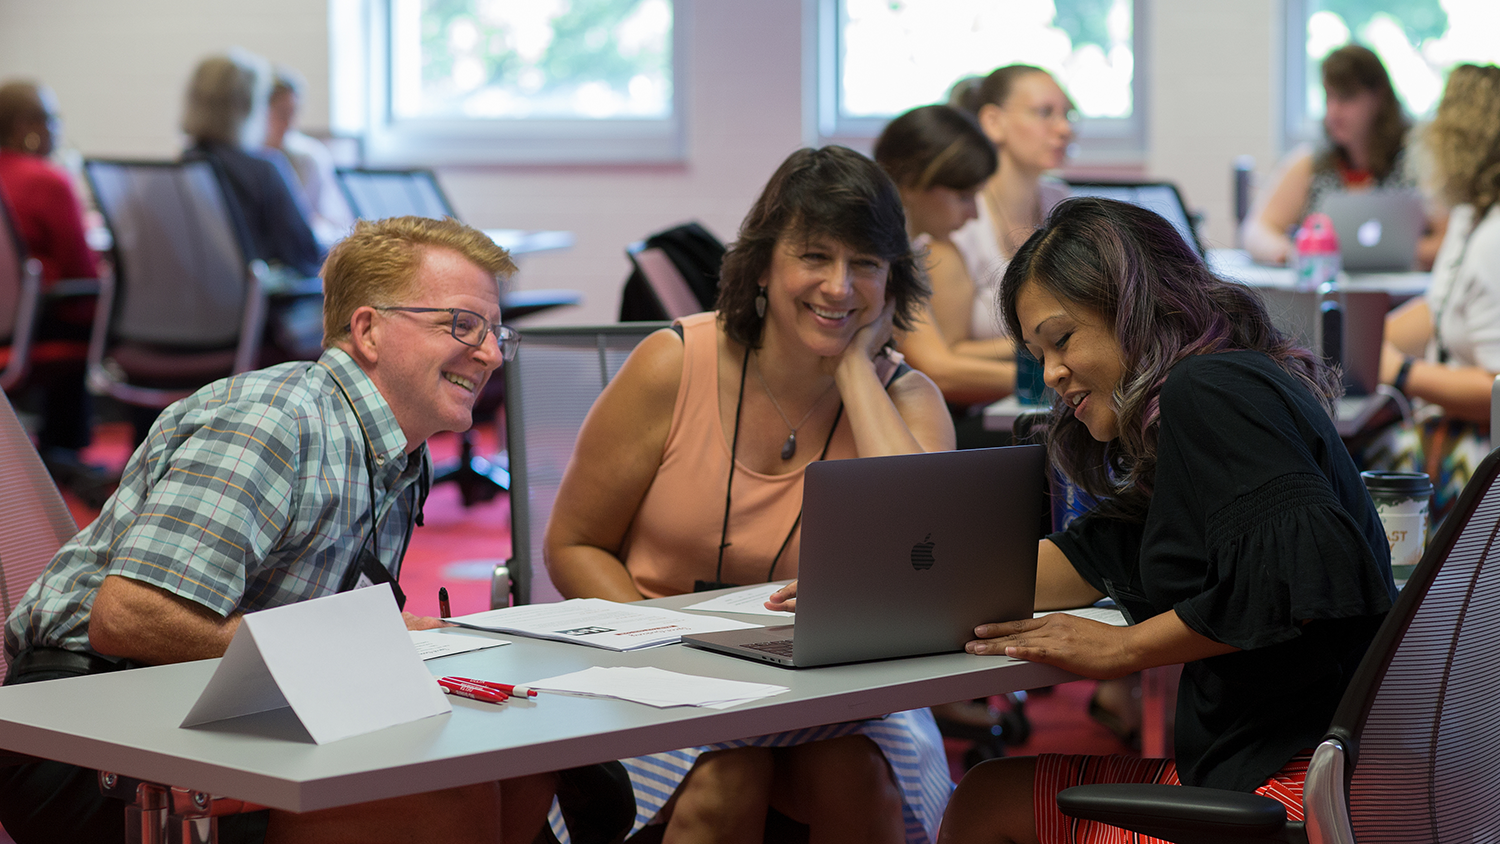 Arlene Mendoza-Moran (right) works with faculty at the 2018 Summer Shorts in Instructional Technologies program. Mendoza-Moran and faculty are working on a laptop at a desk.